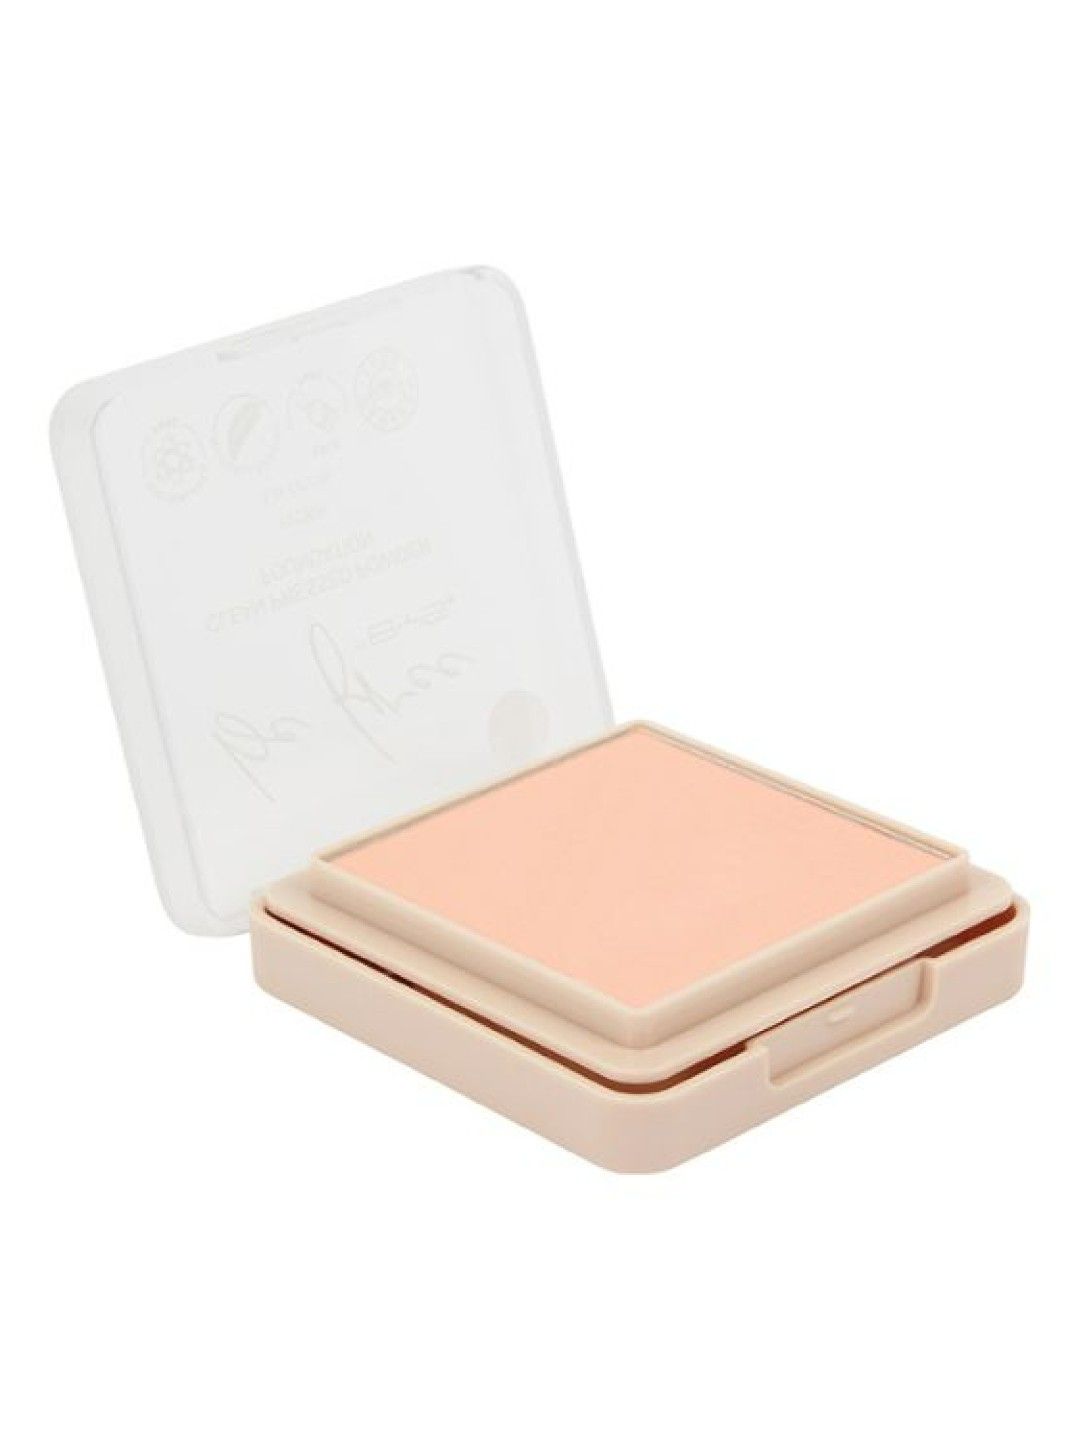 BYS Be Free Clean Pressed Powder Foundation